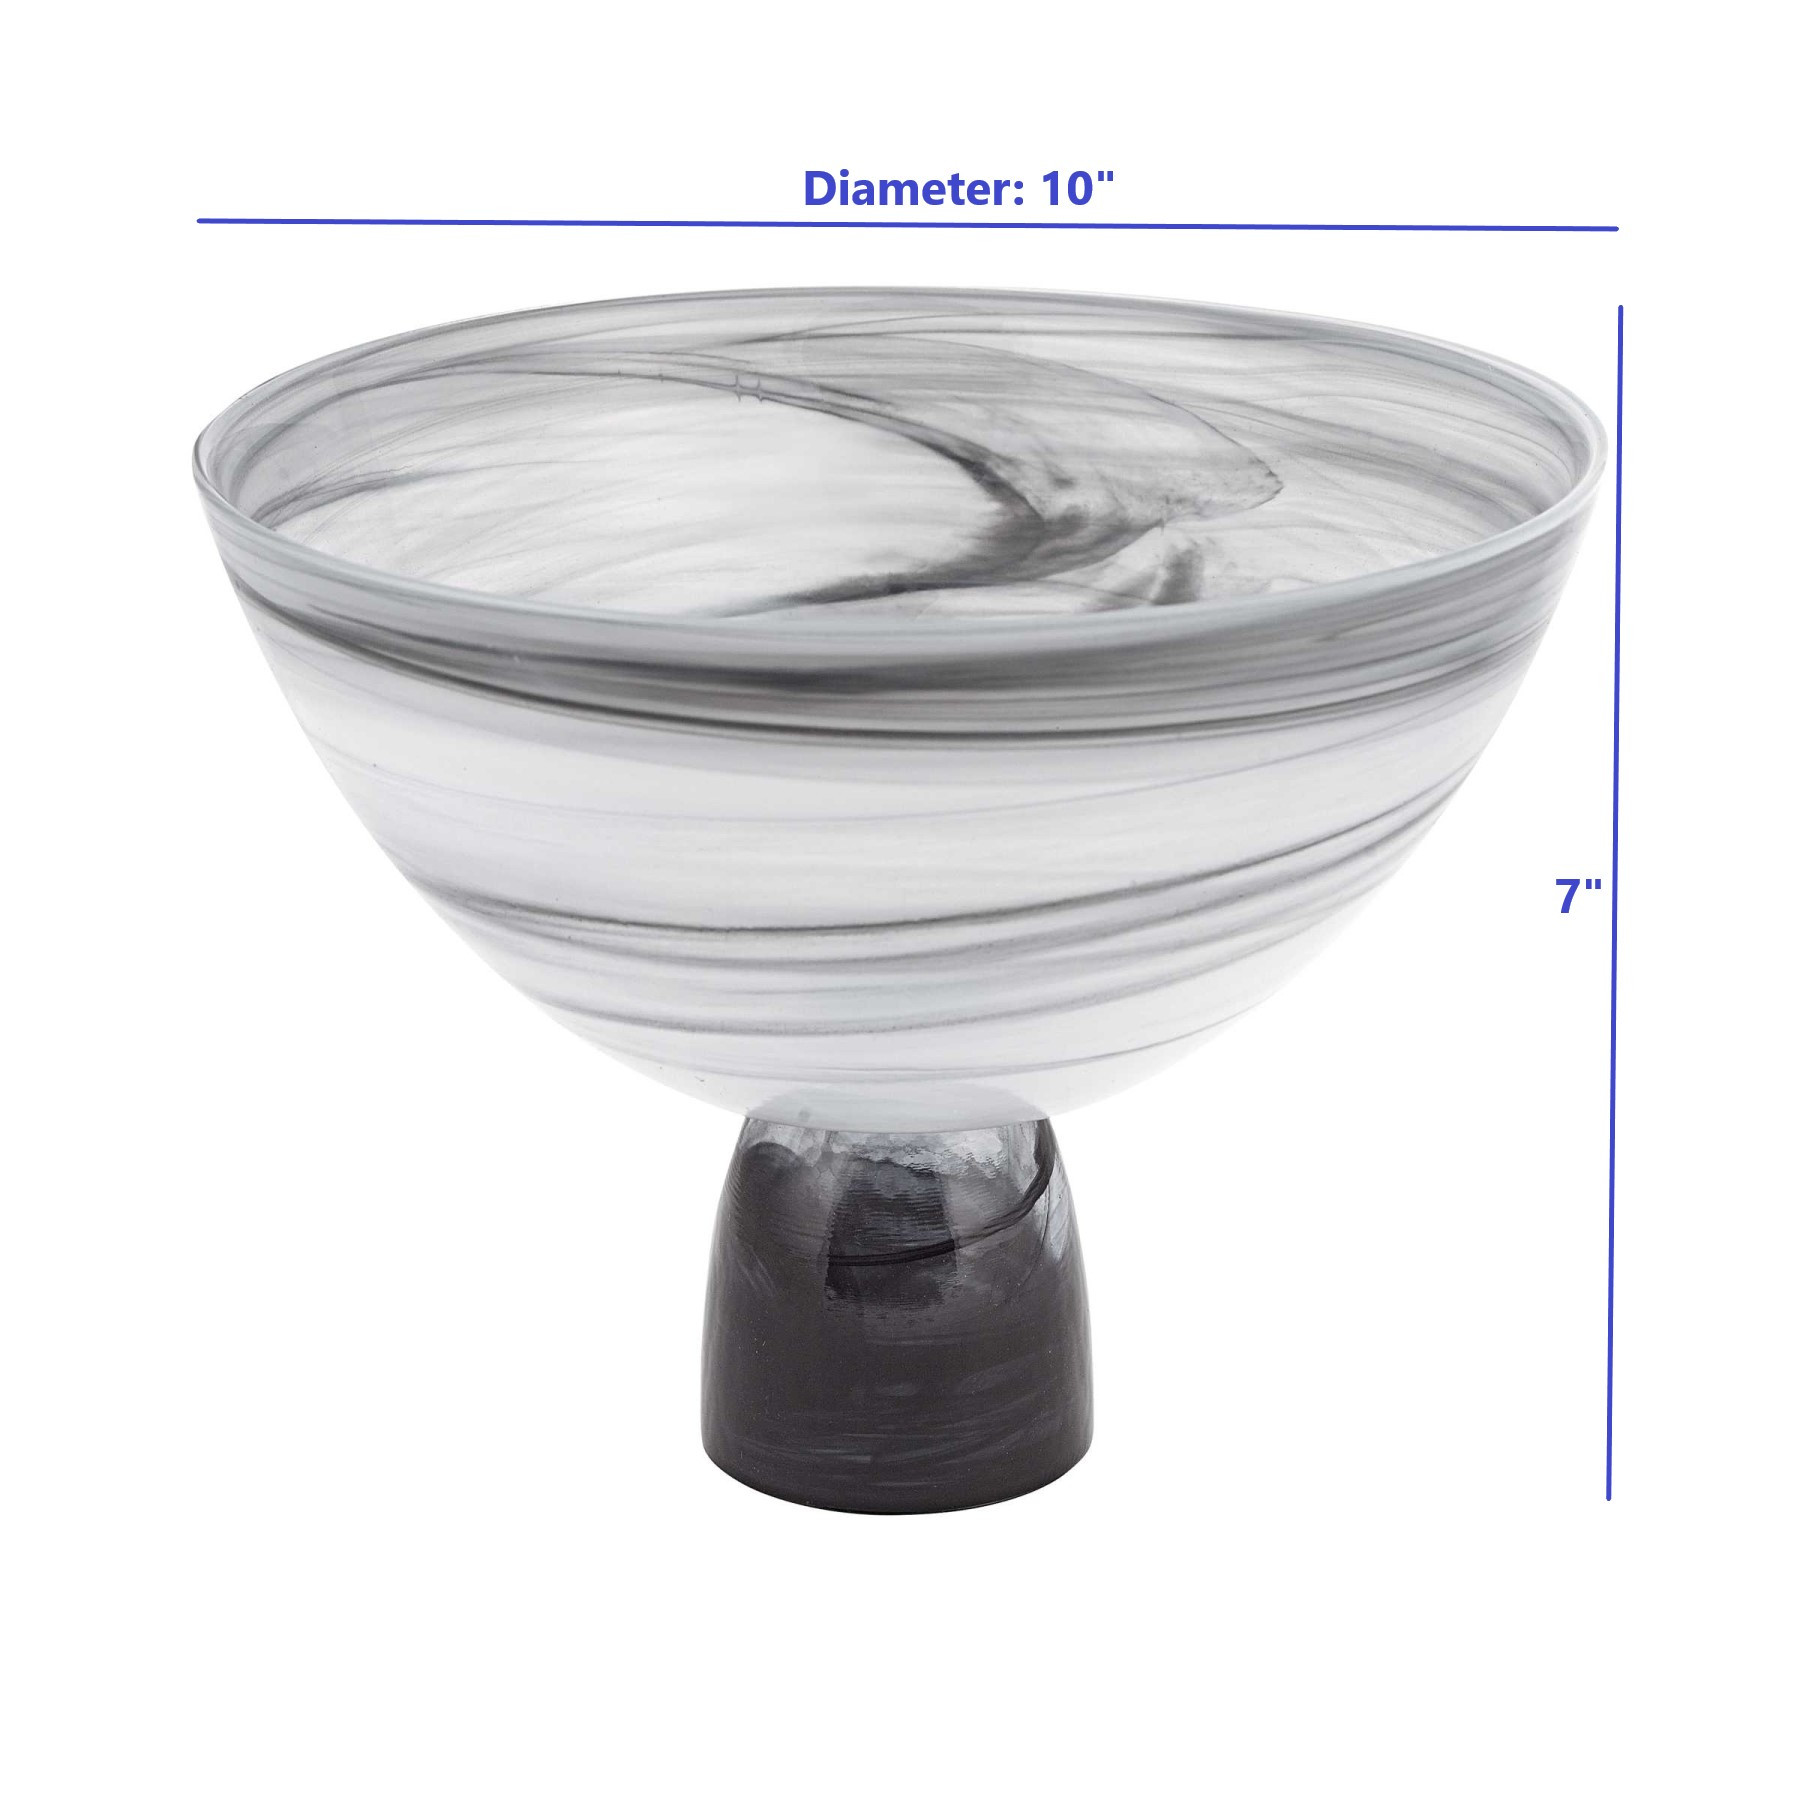 10" Mouth Blown Polish Glass Footed Centerpiece Bowl